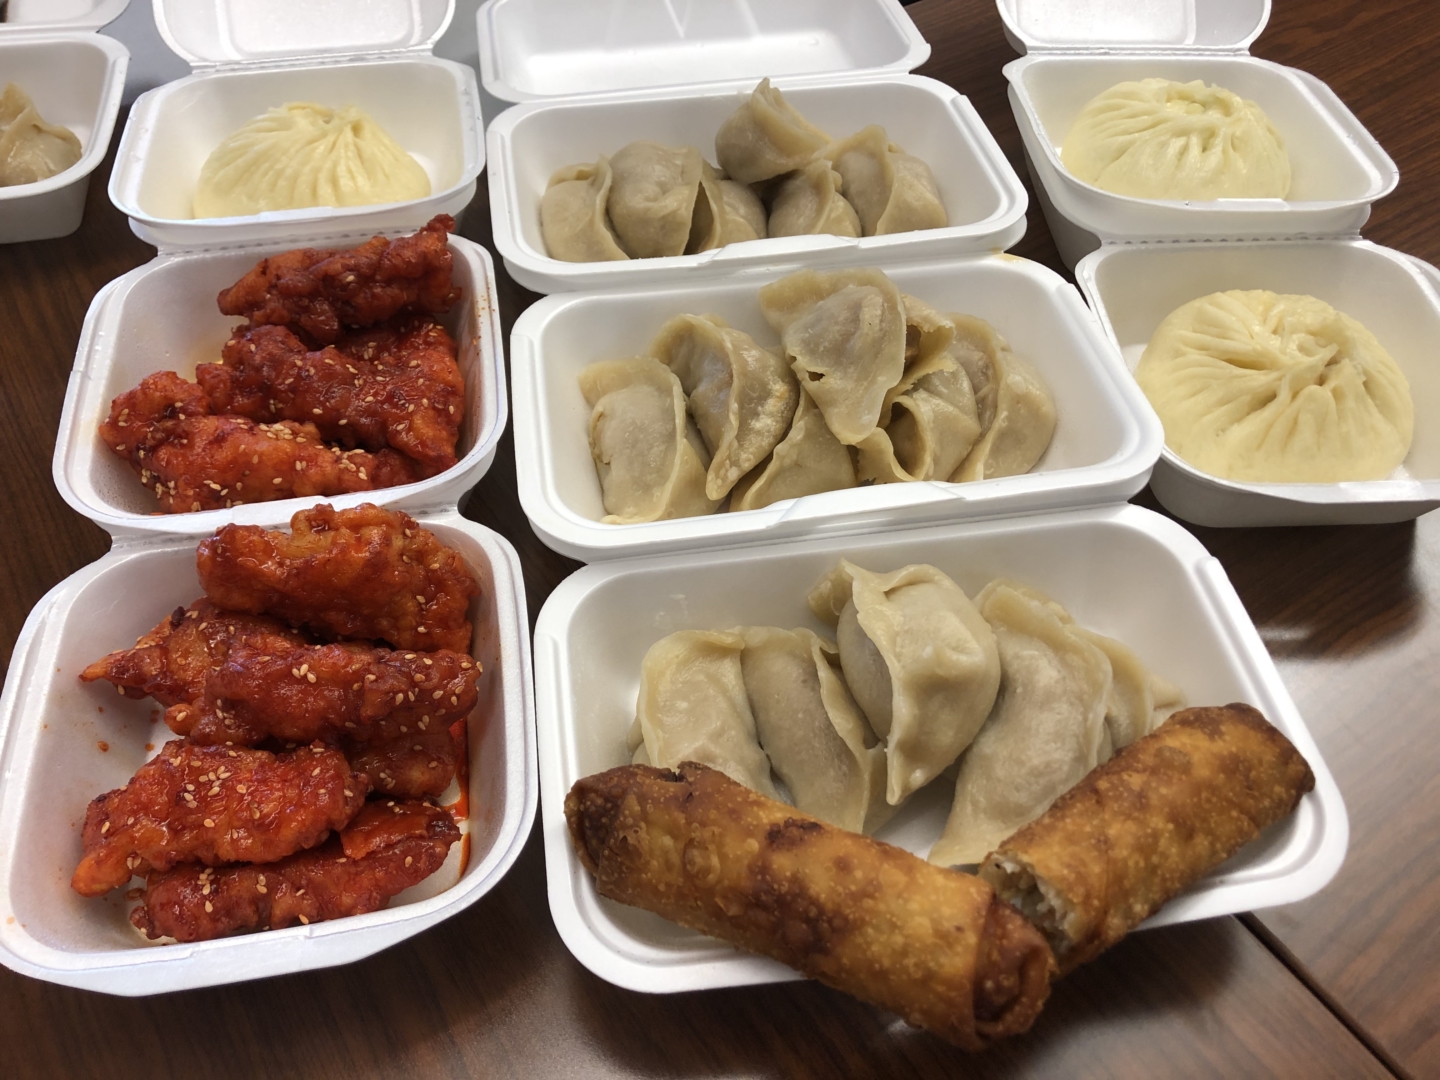 The Flying Dumpling on Monday had its soft opening and serves dumplings, egg rolls and chicken wings. | Trevor Nolley/The Cougar